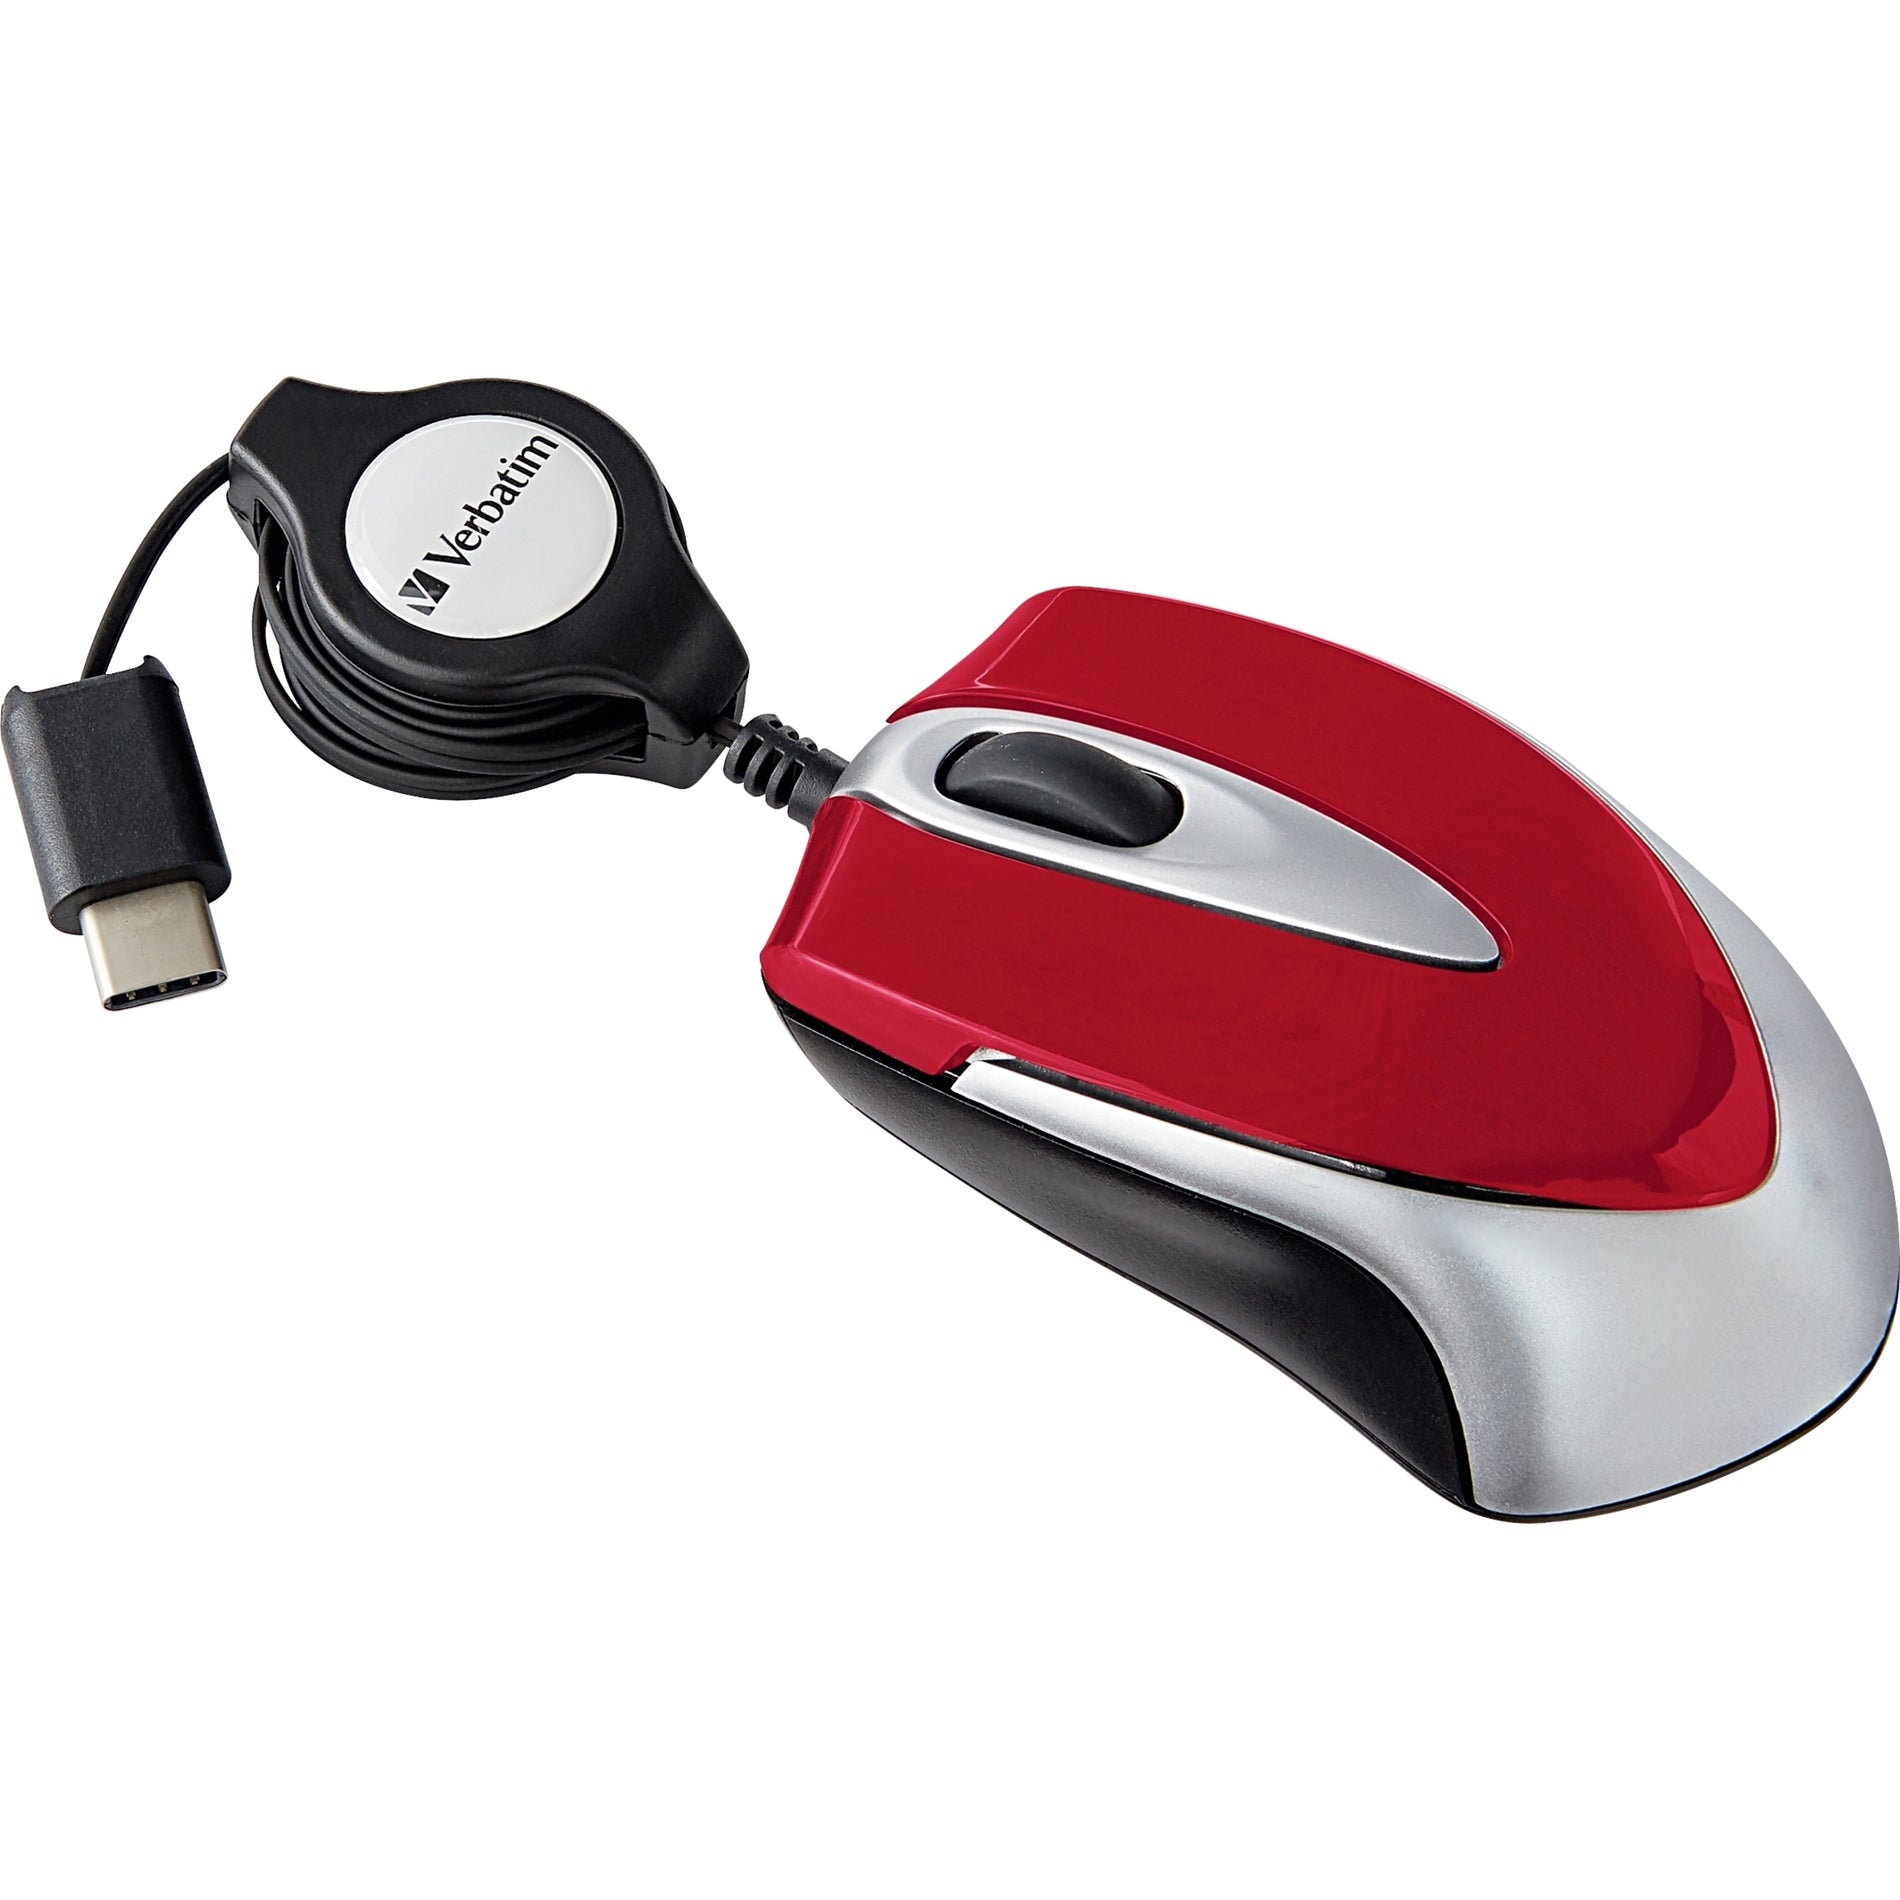 Verbatim 70236 USB-C Mini Optical Travel Mouse-Red, 3 Buttons, Cable Connectivity